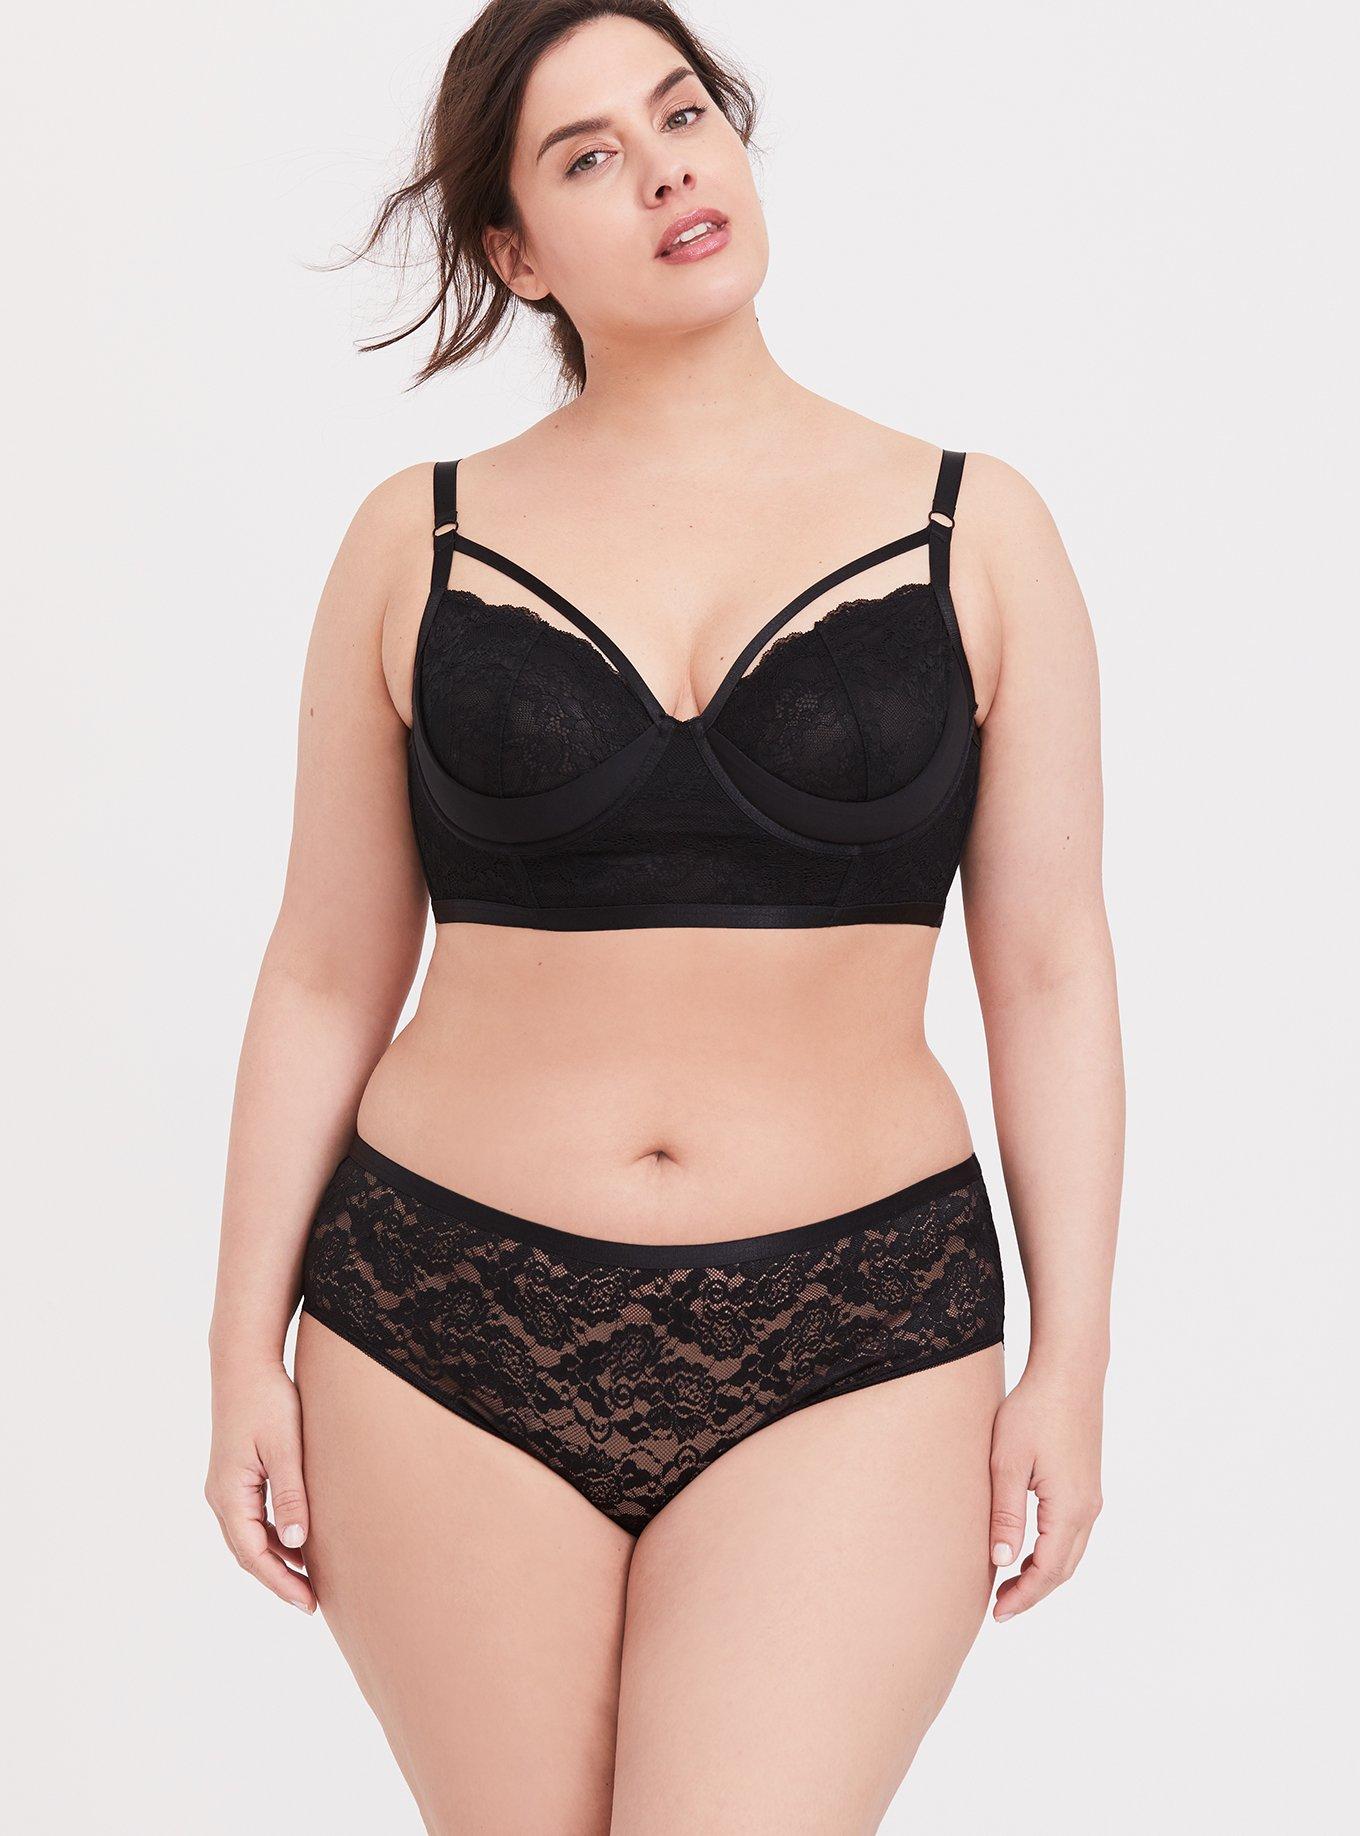 Plus Size Lace Boyshorts & Lace Hipster Panties Set Sexy Hipster